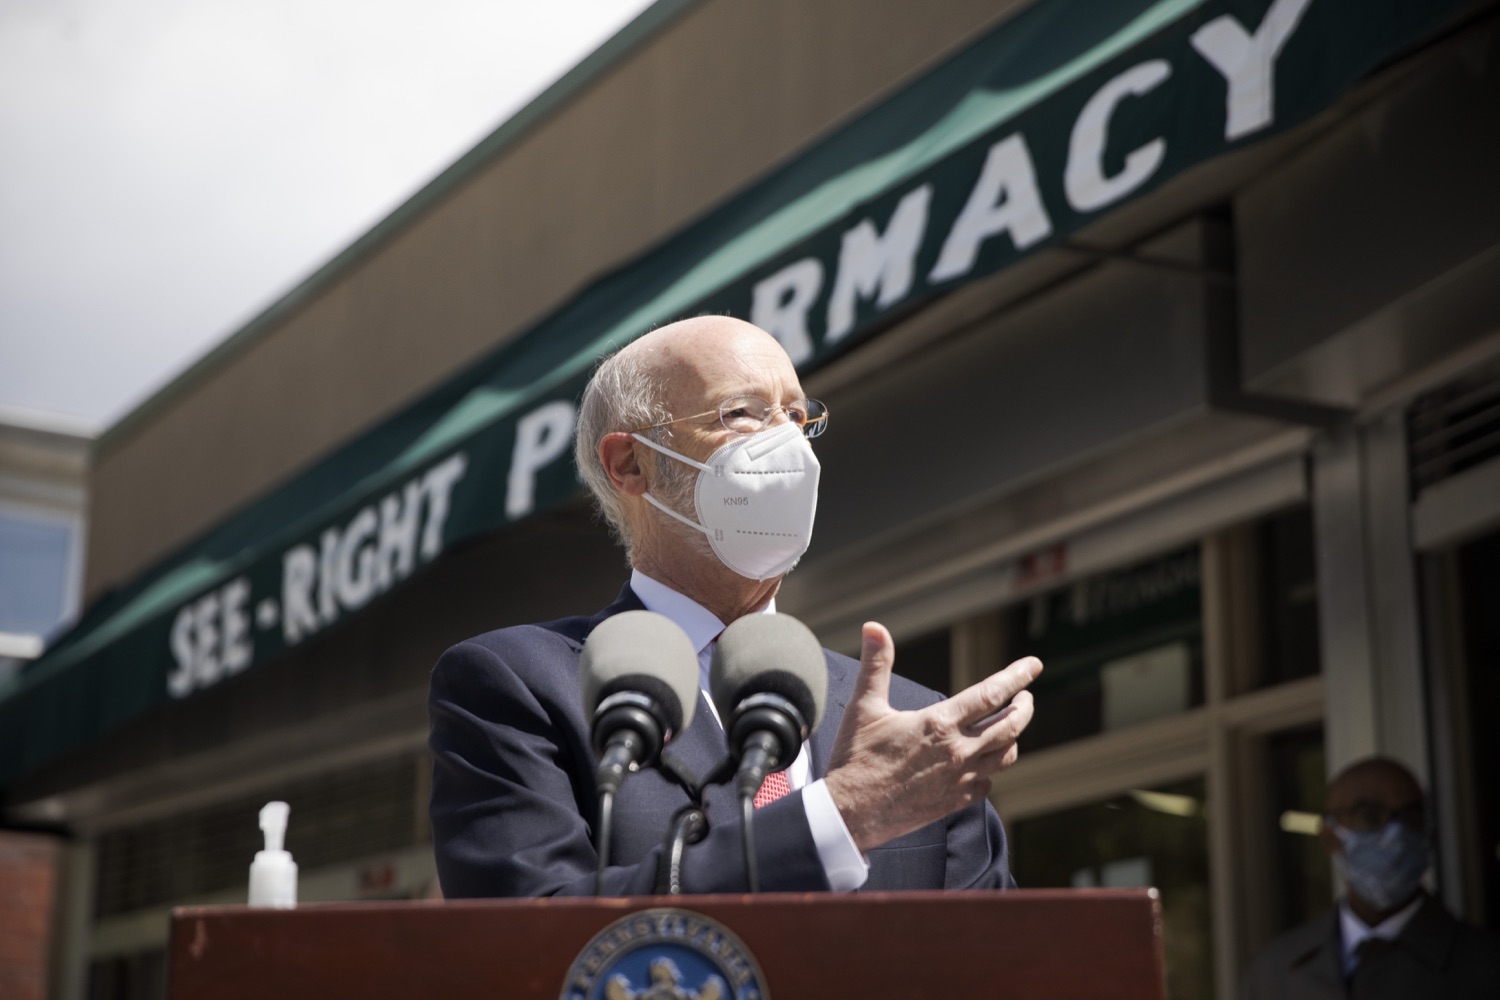 Pennsylvania Governor Tom Wolf speaking with the press.  Governor Tom Wolf today visited See-Right Pharmacy in Harrisburg to learn more about how the local, neighborhood pharmacy is vaccinating community members and to talk about COVID-19 vaccine hesitancy in Pennsylvania. Harrisburg, PA  April 22, 2021<br><a href="https://filesource.amperwave.net/commonwealthofpa/photo/18704_gov_seeRight_dz_008.jpg" target="_blank">⇣ Download Photo</a>